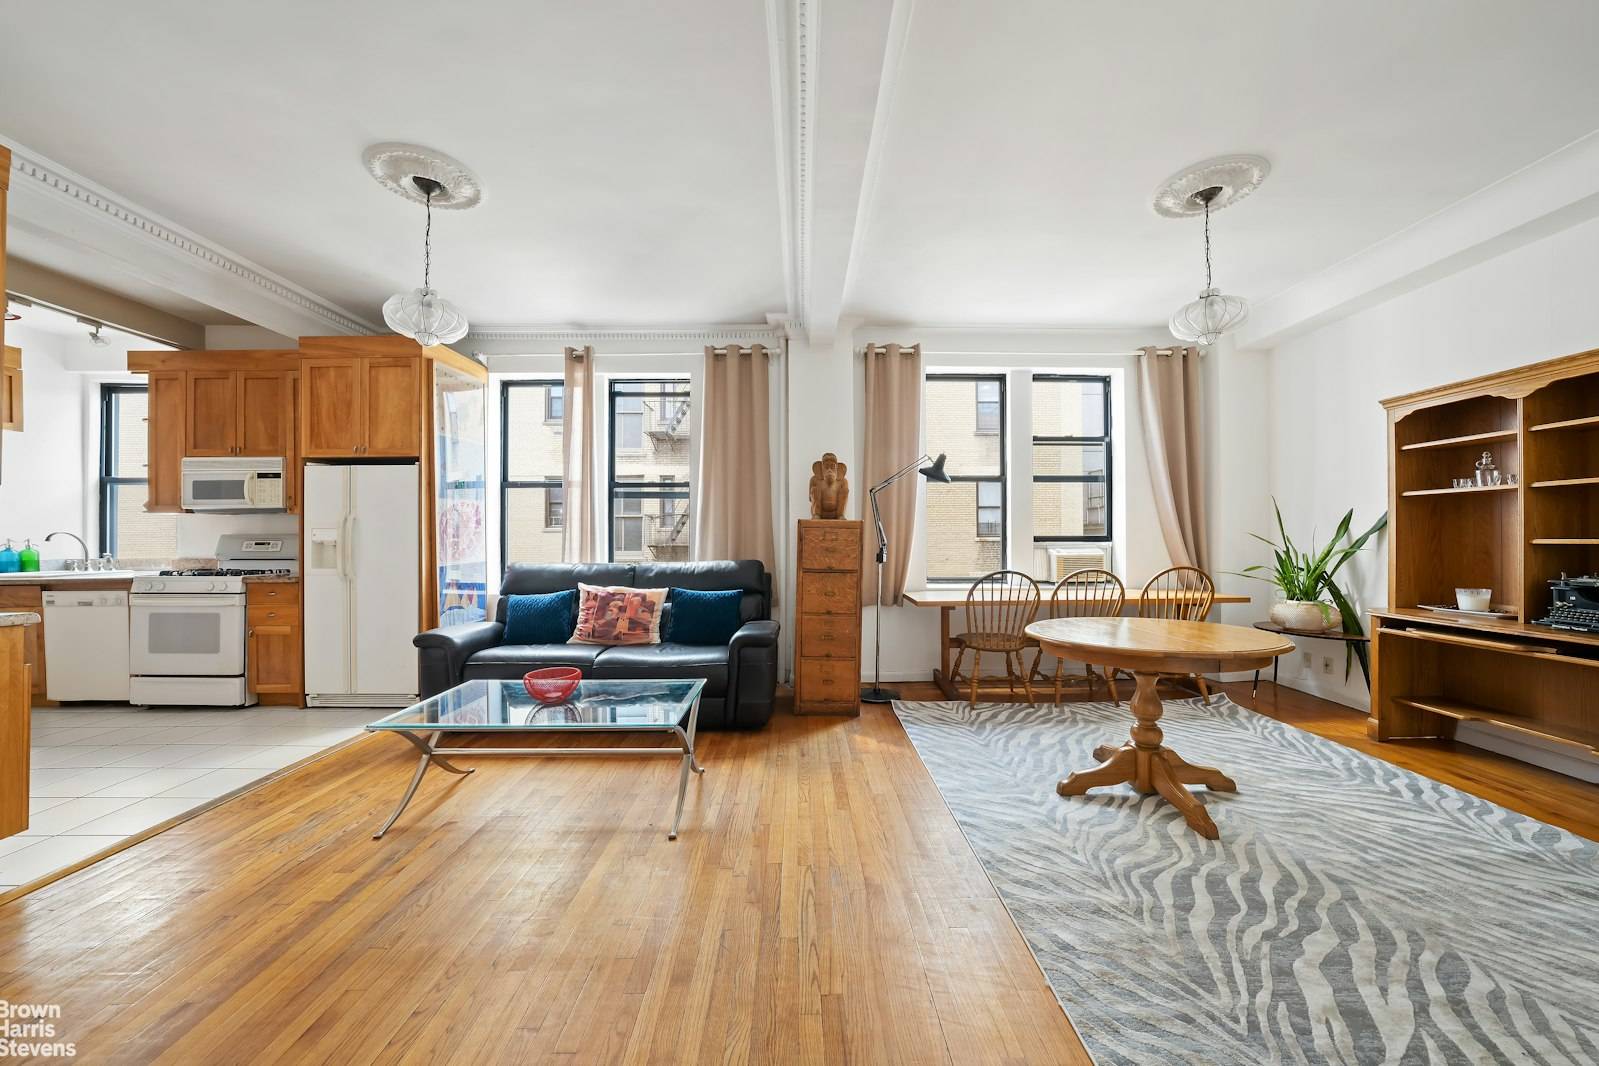 Experience the charm of a downtown loft combined with the classic ambiance of Morningside Heights in this exquisite one bedroom apartment.